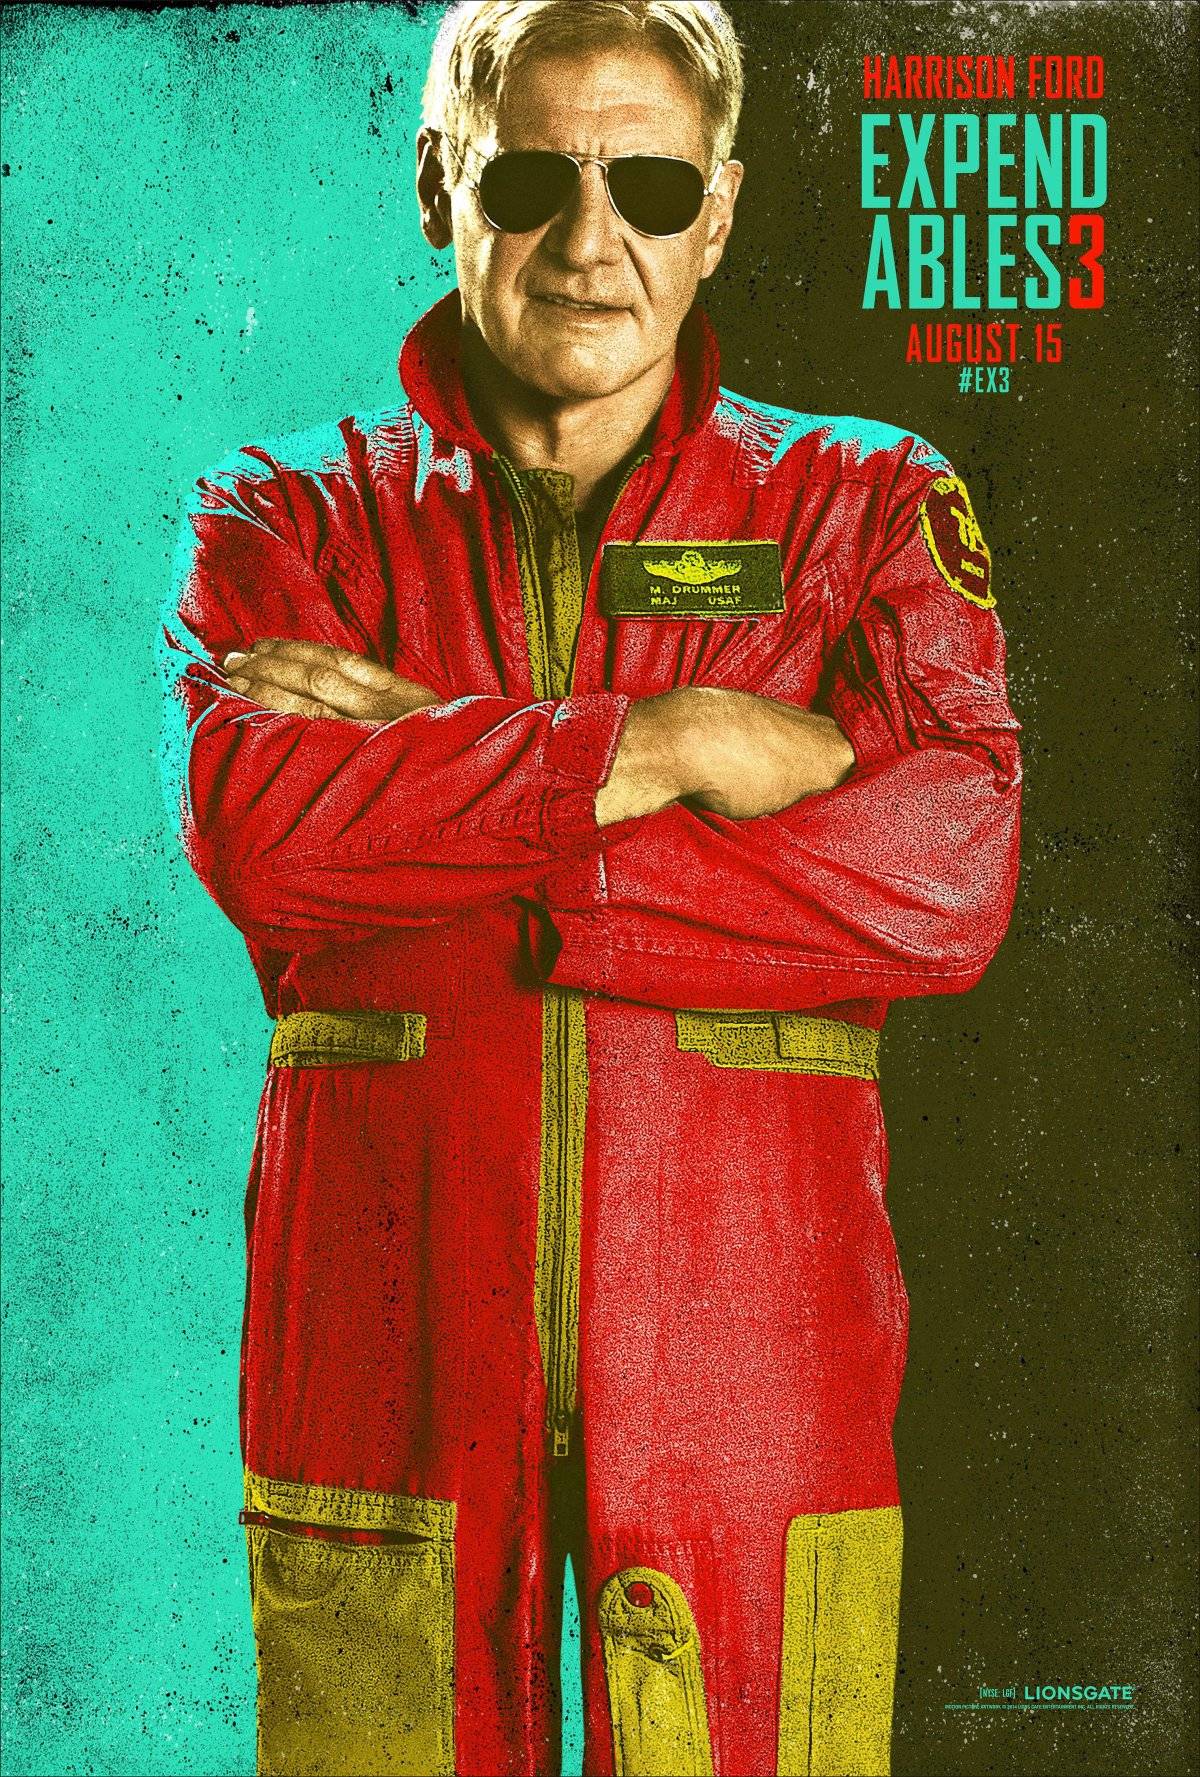 Poster Print The Expendables 3 Harrison Ford **DISCOUNTED OFFERS**  A3 A4